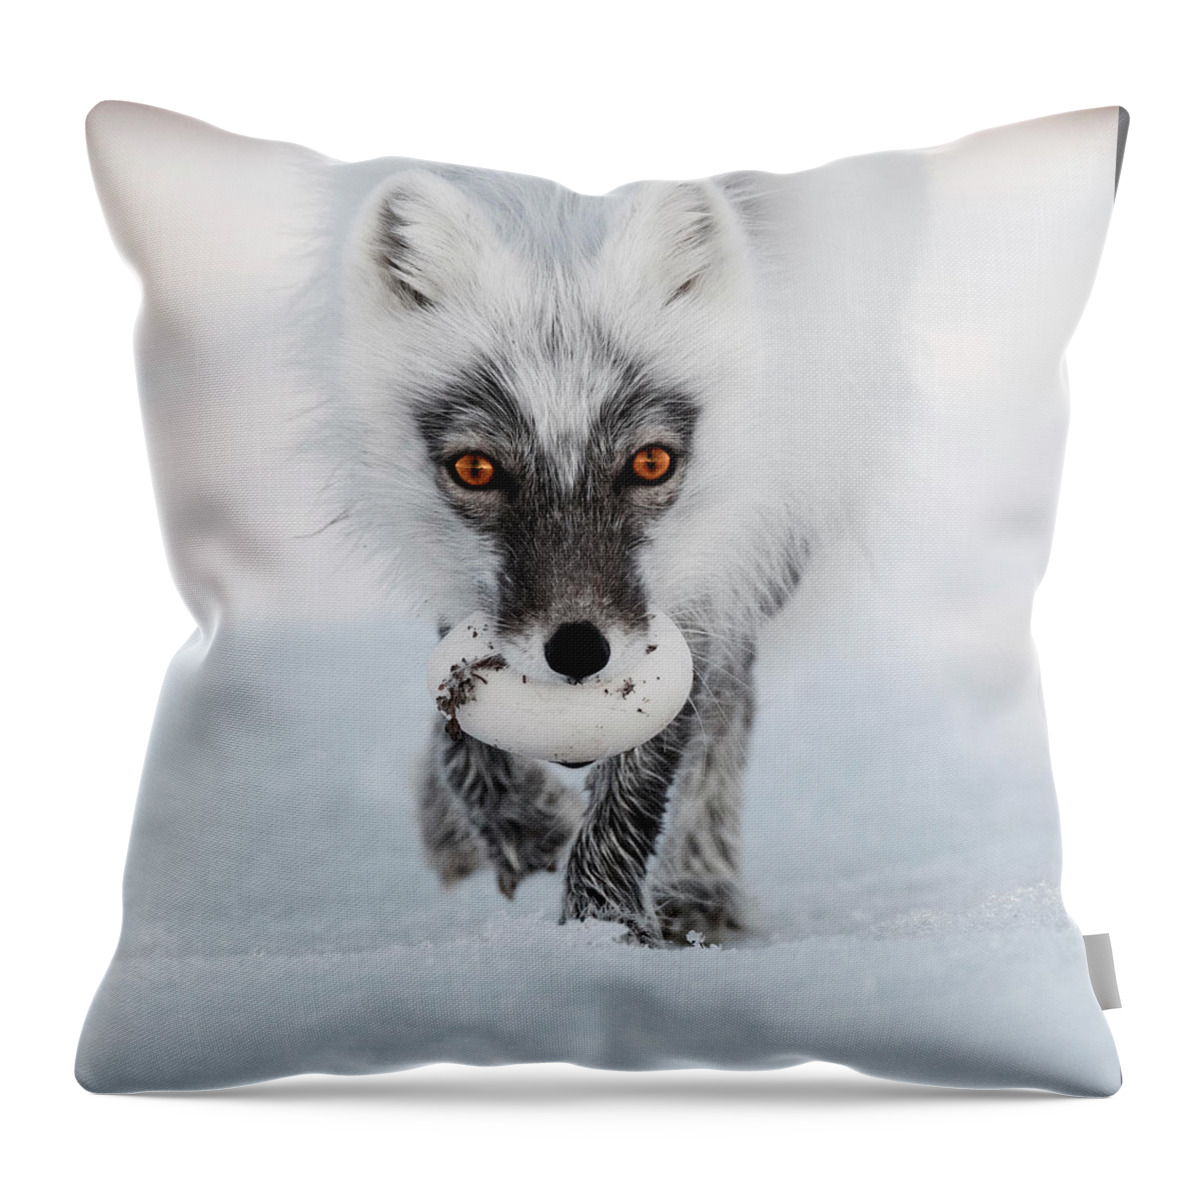 00520033 Throw Pillow featuring the photograph Arctic Fox and Snow Goose Egg by Sergey Gorskov